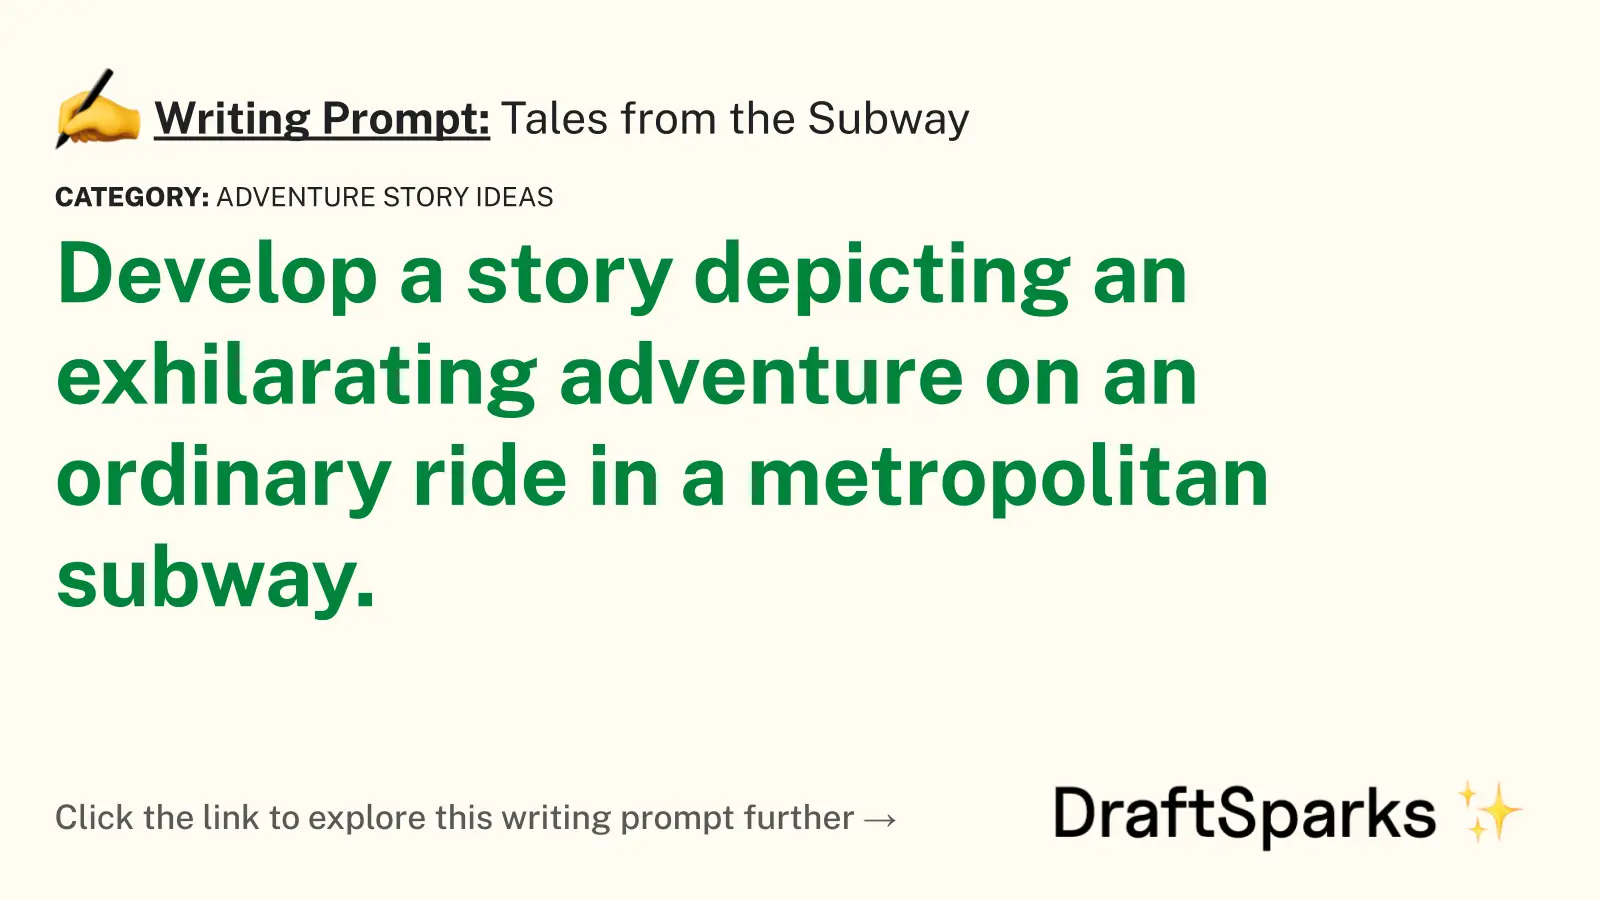 Tales from the Subway